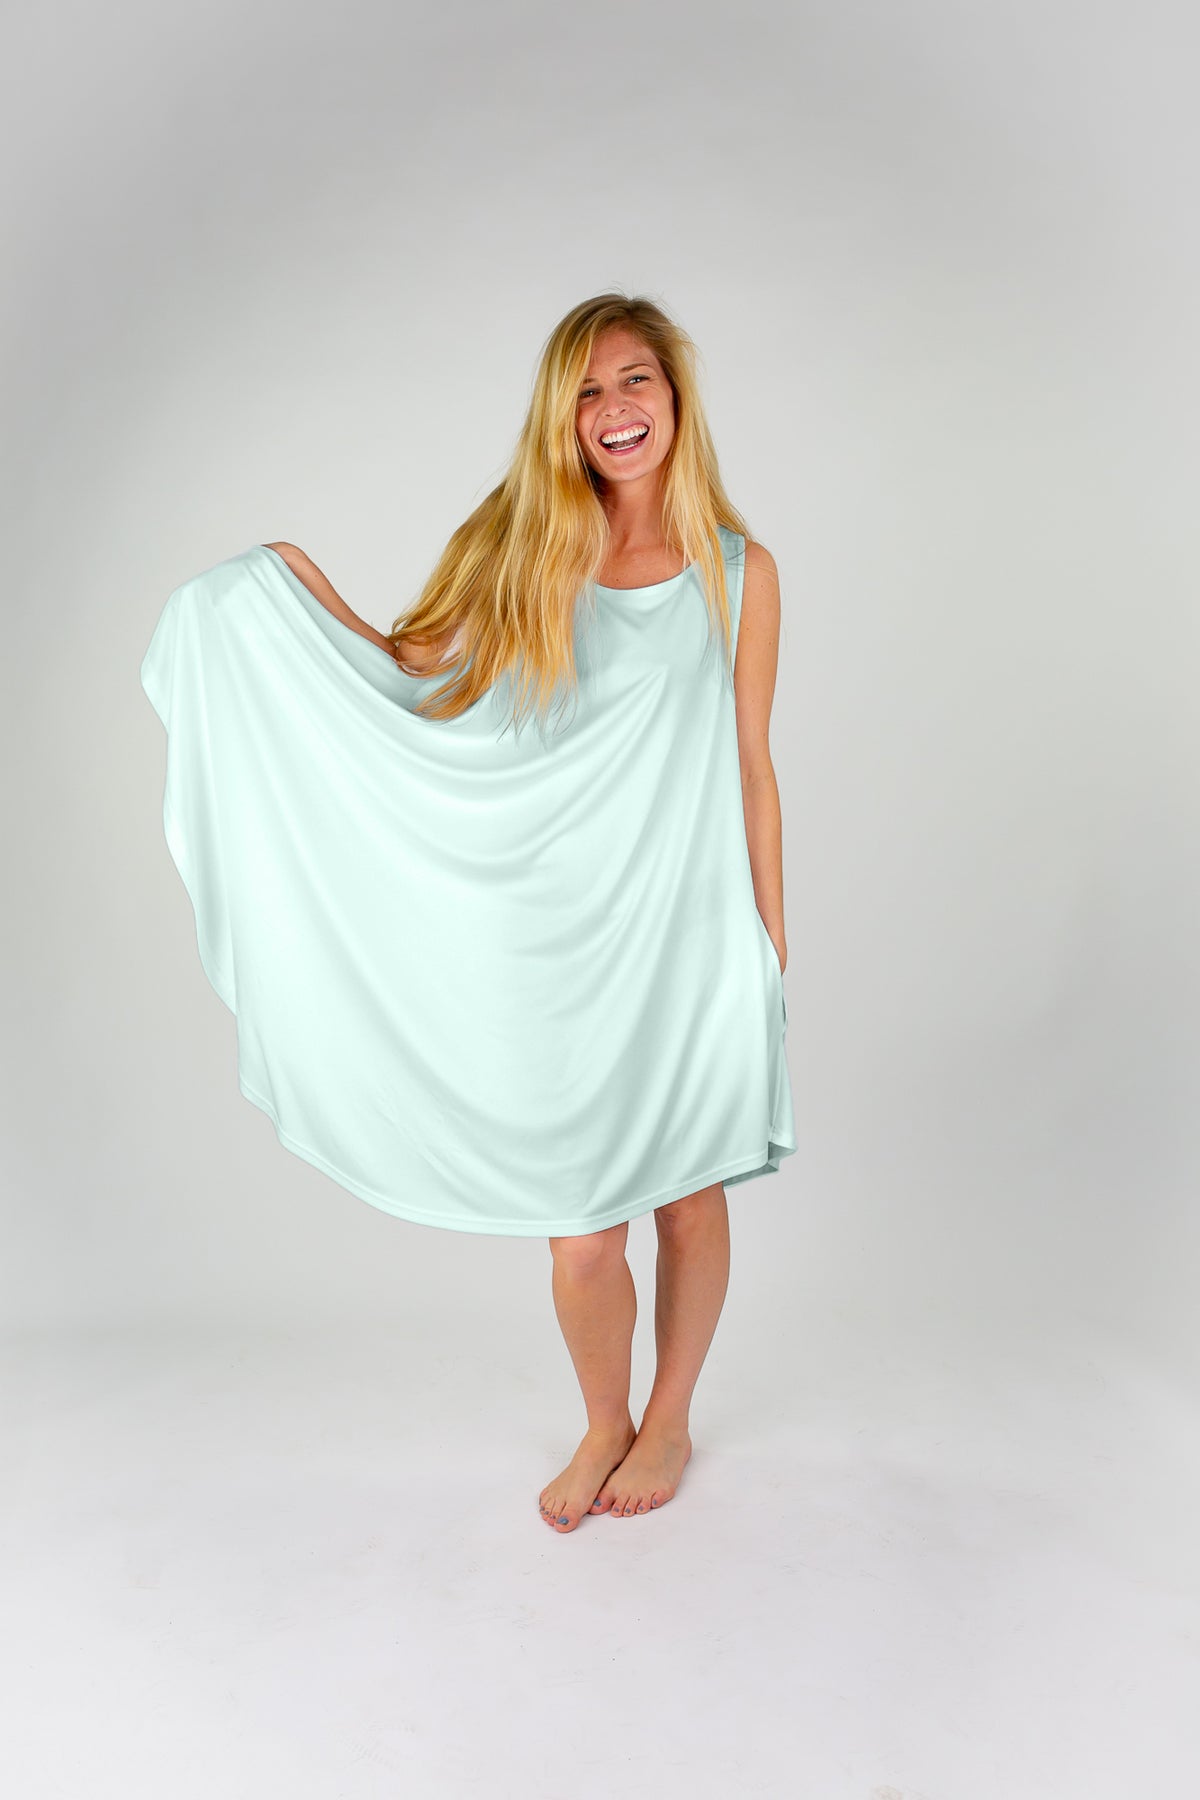 Sea Glass Green - Decked Out Dress